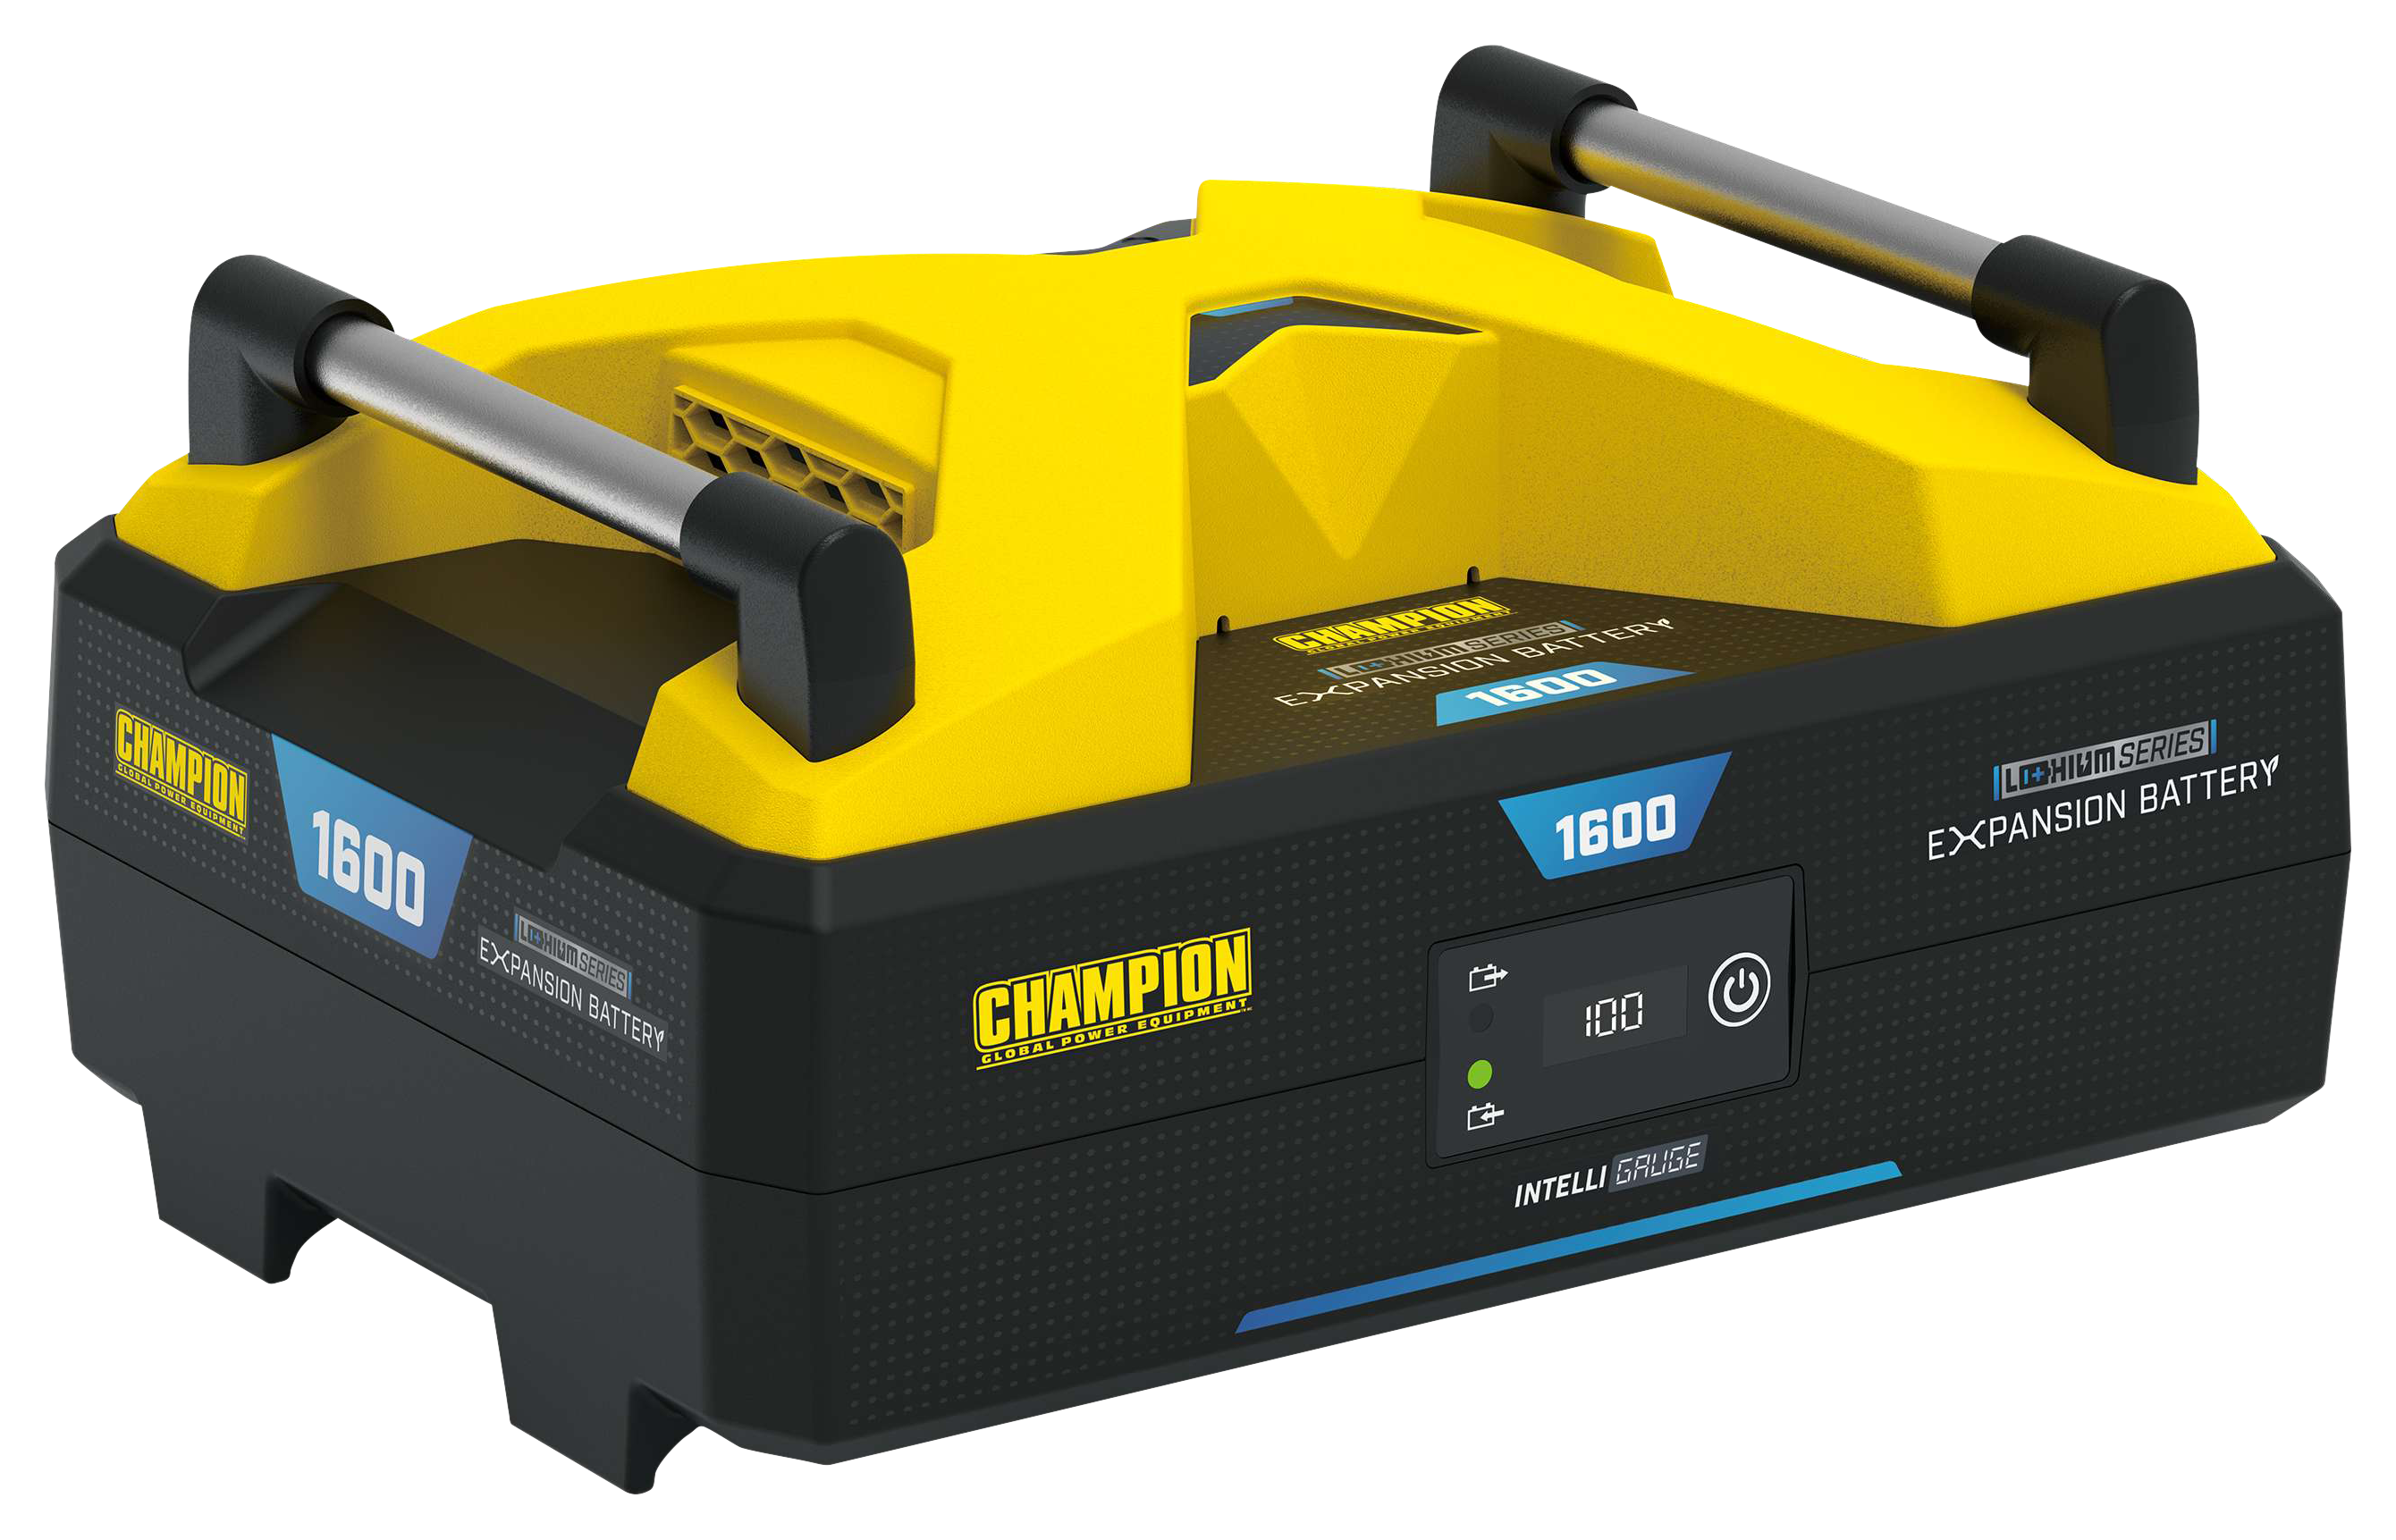 Champion 8,750W/7,000W Open Frame Inverter Generator with Electric Start  and Wheel Kit